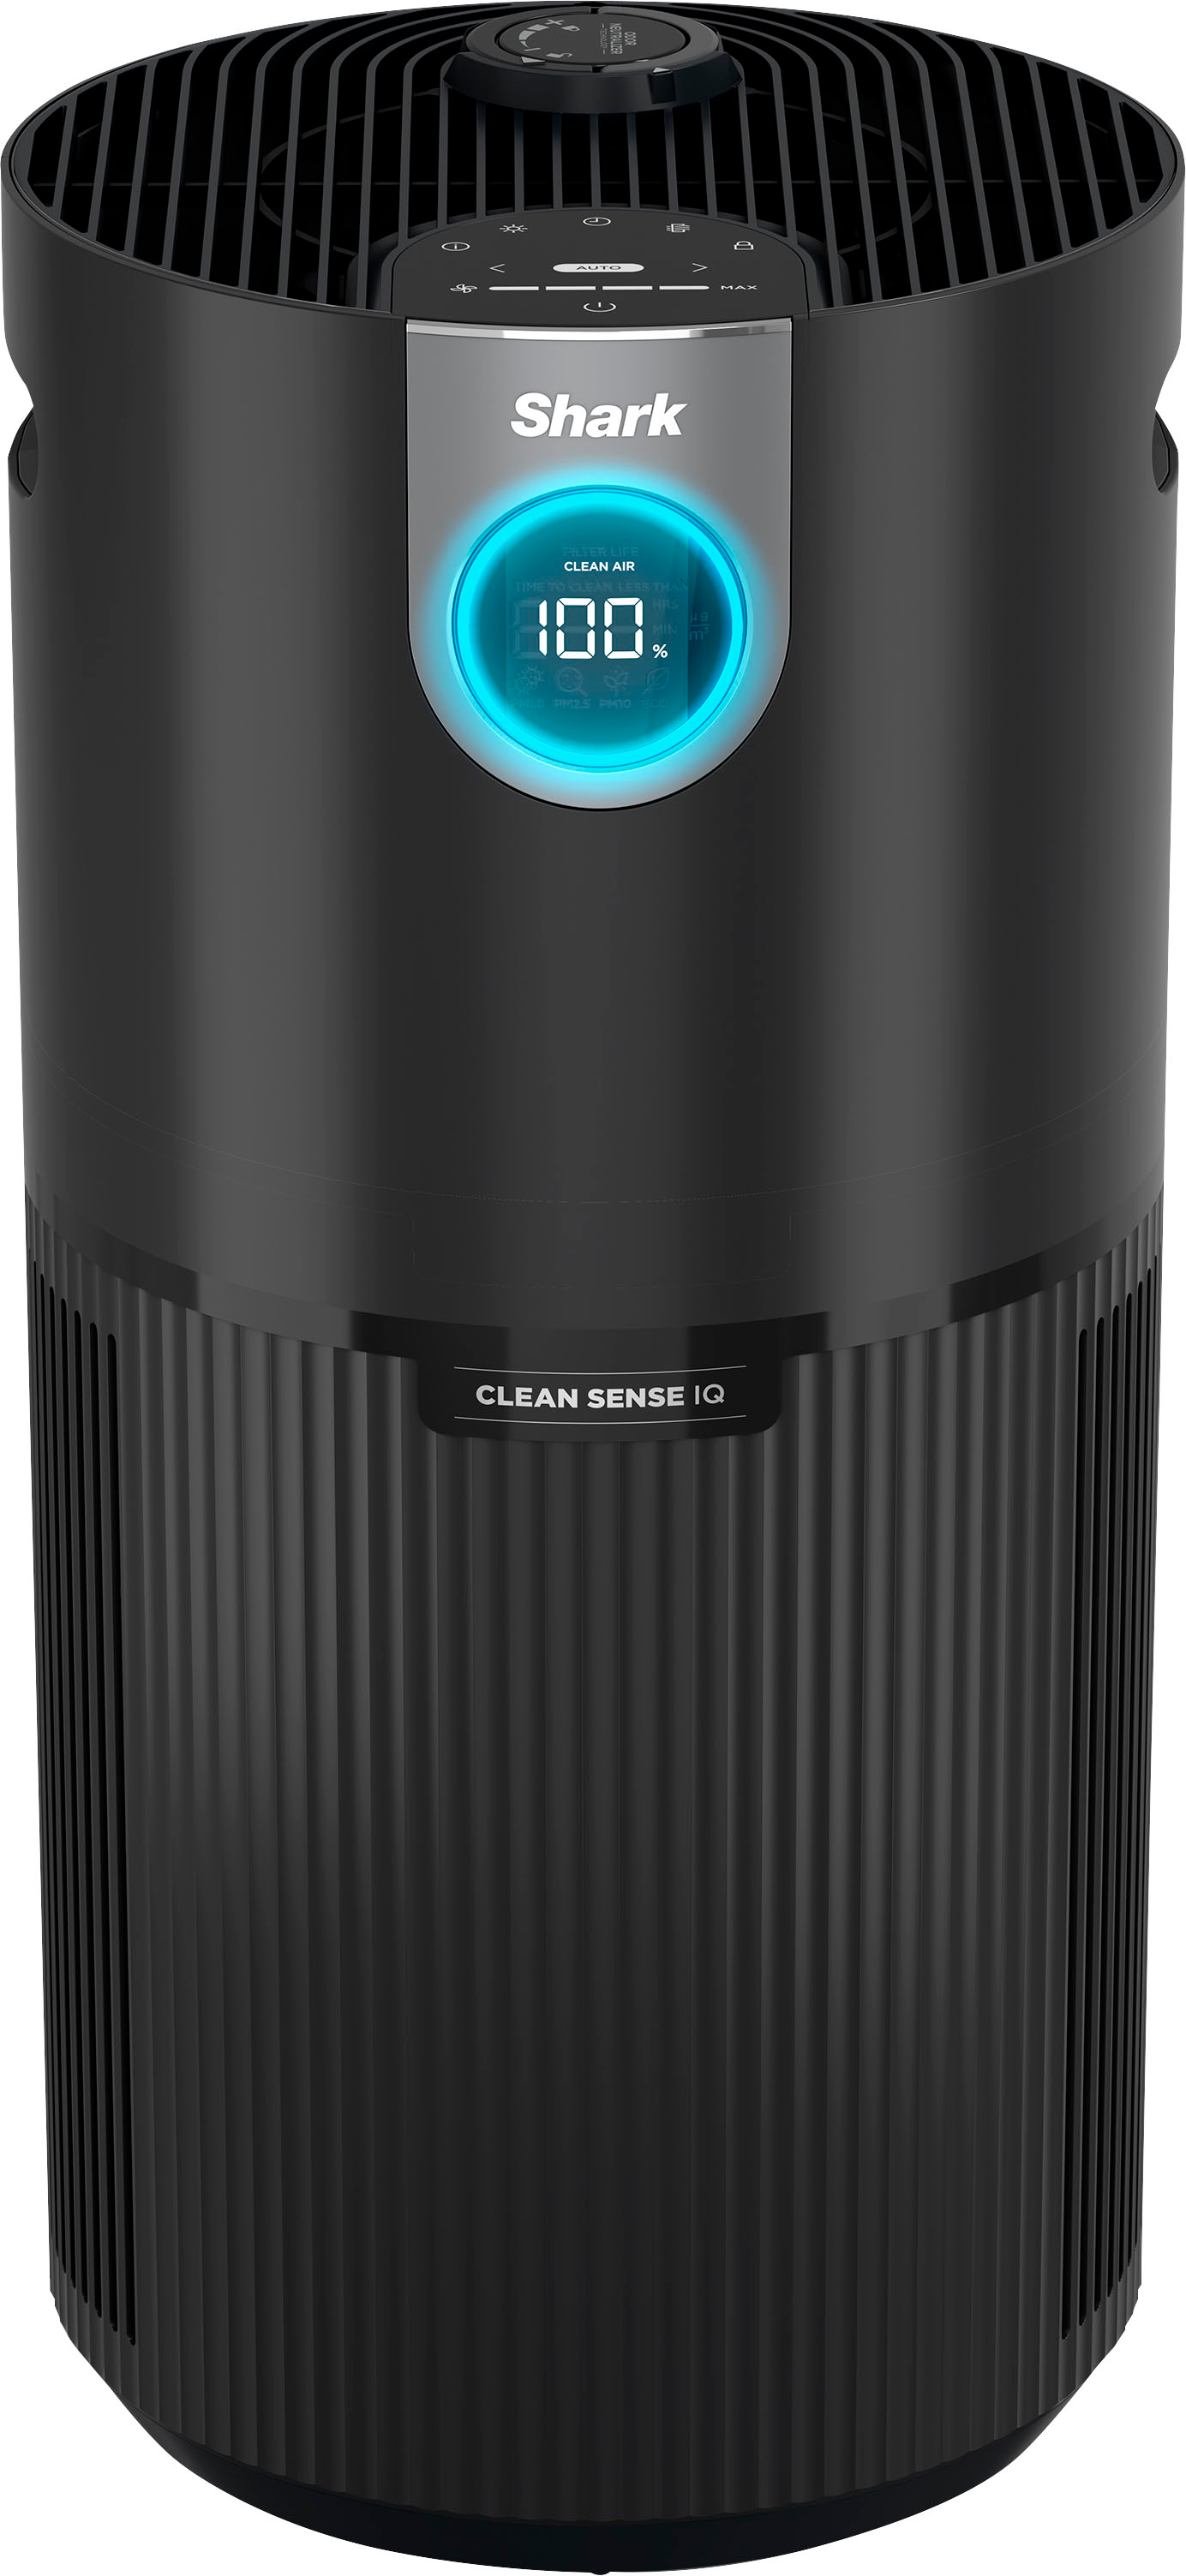 Get Rid of Pet Odors With This Portable Air Purifier